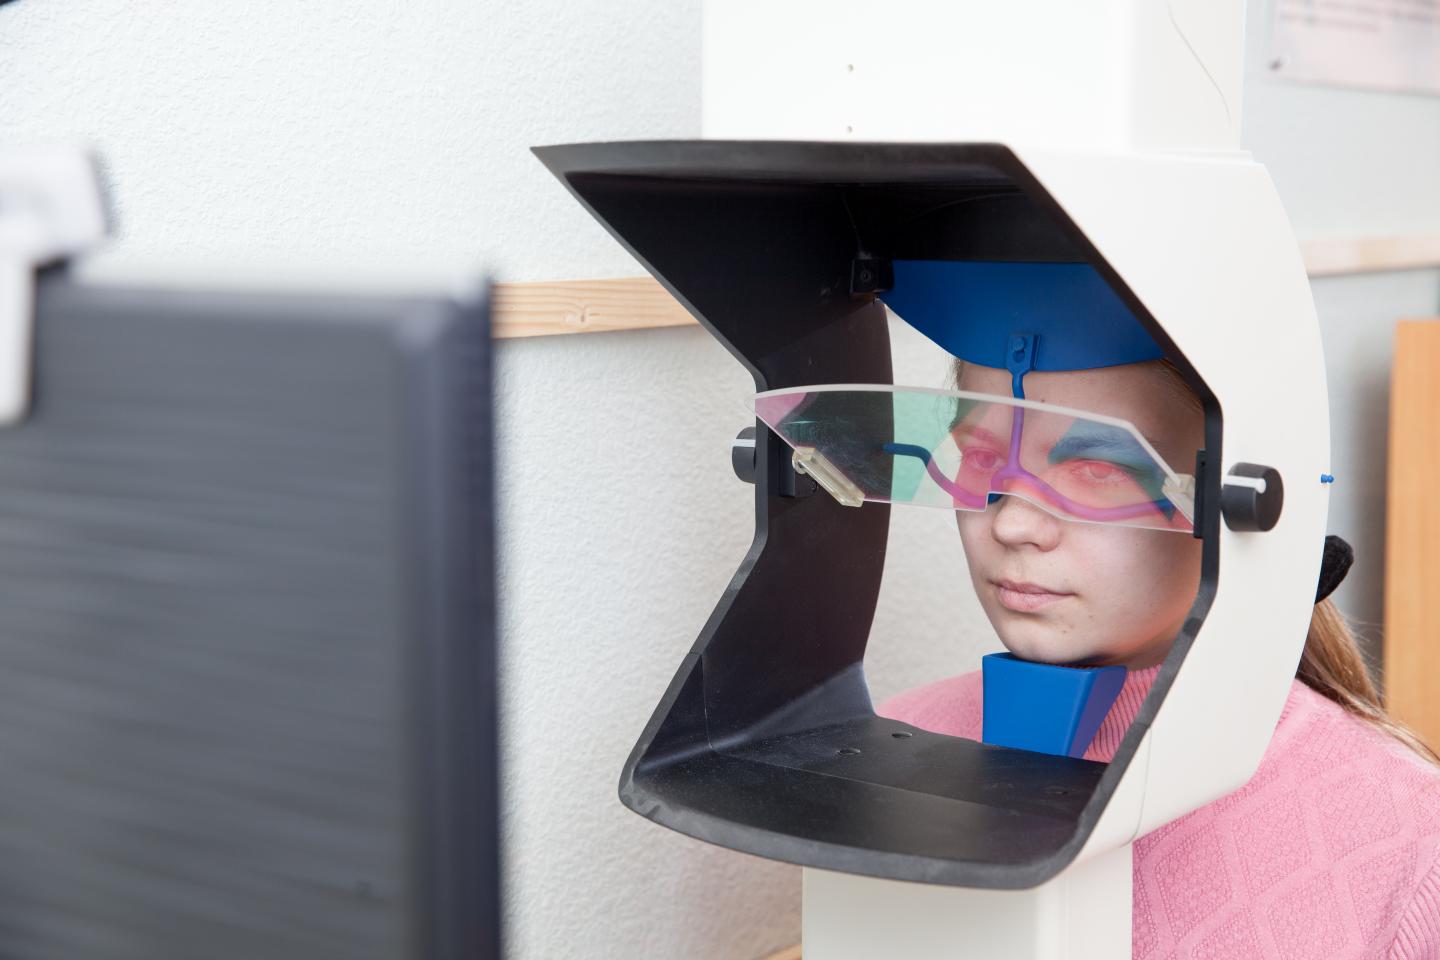 Eye Tracking Is a Process of Determining the Coordinates of the Point of Gaze